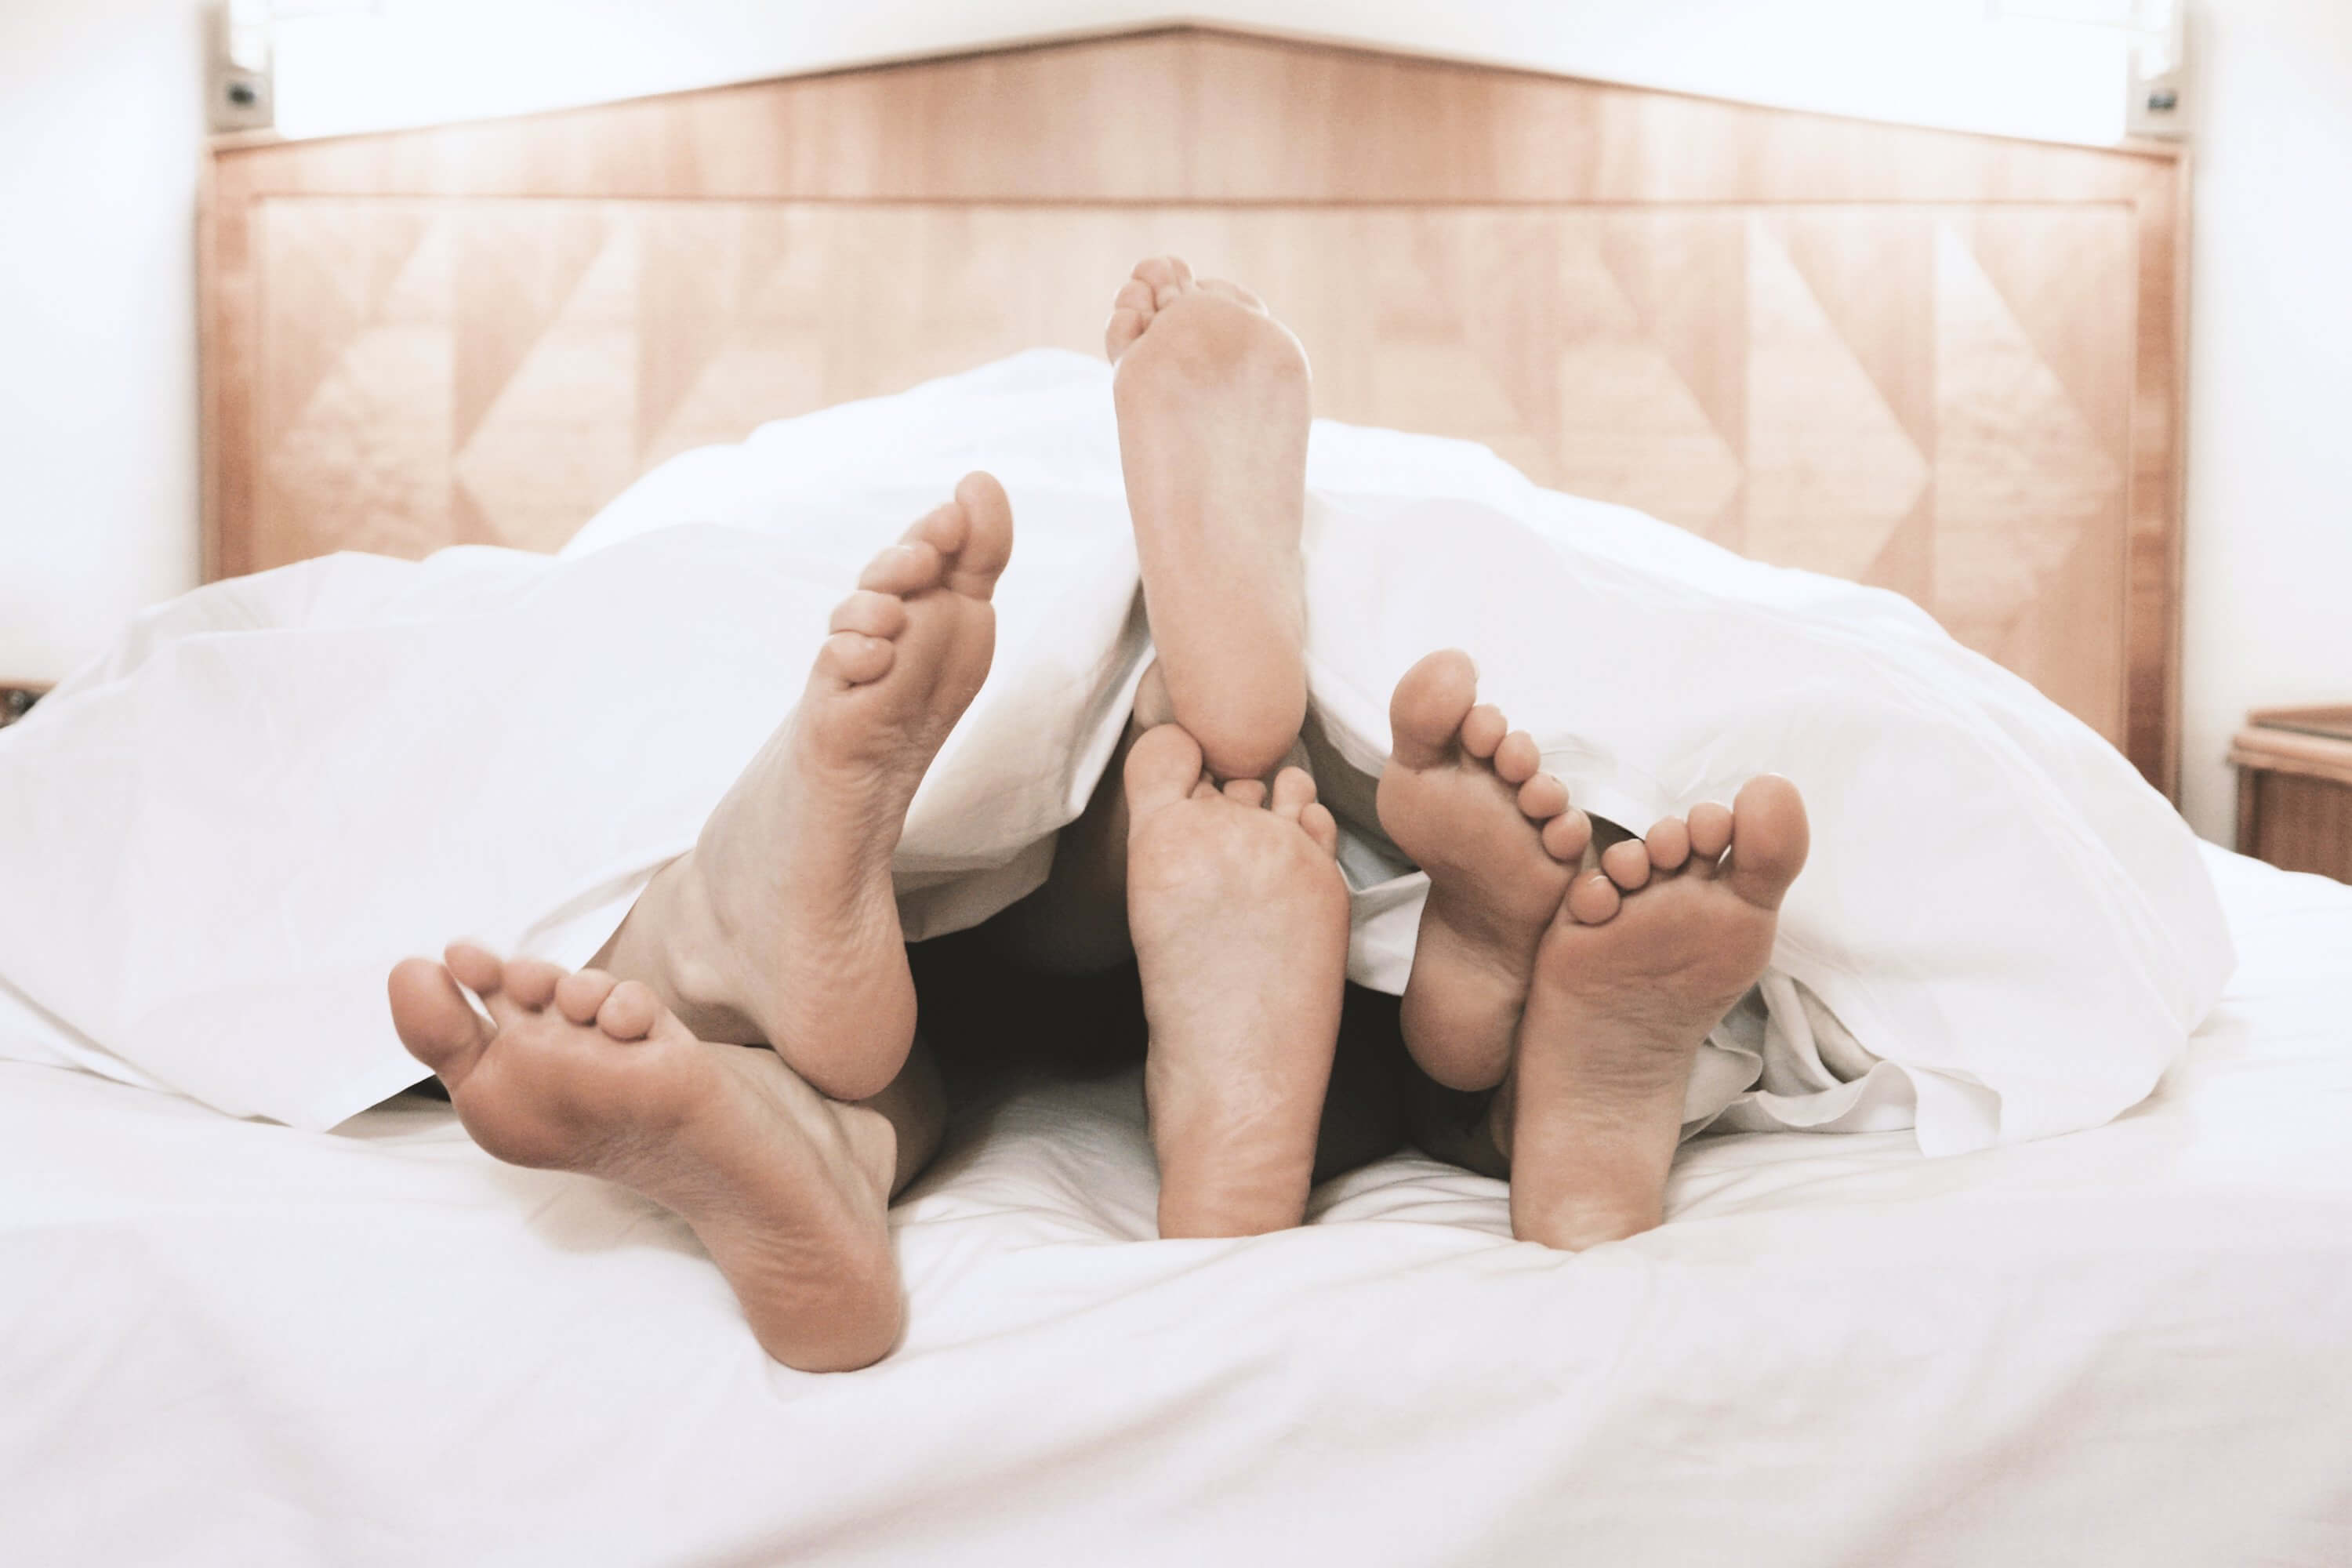 What It's Really Like To Have a Threesome | MysteryVibe